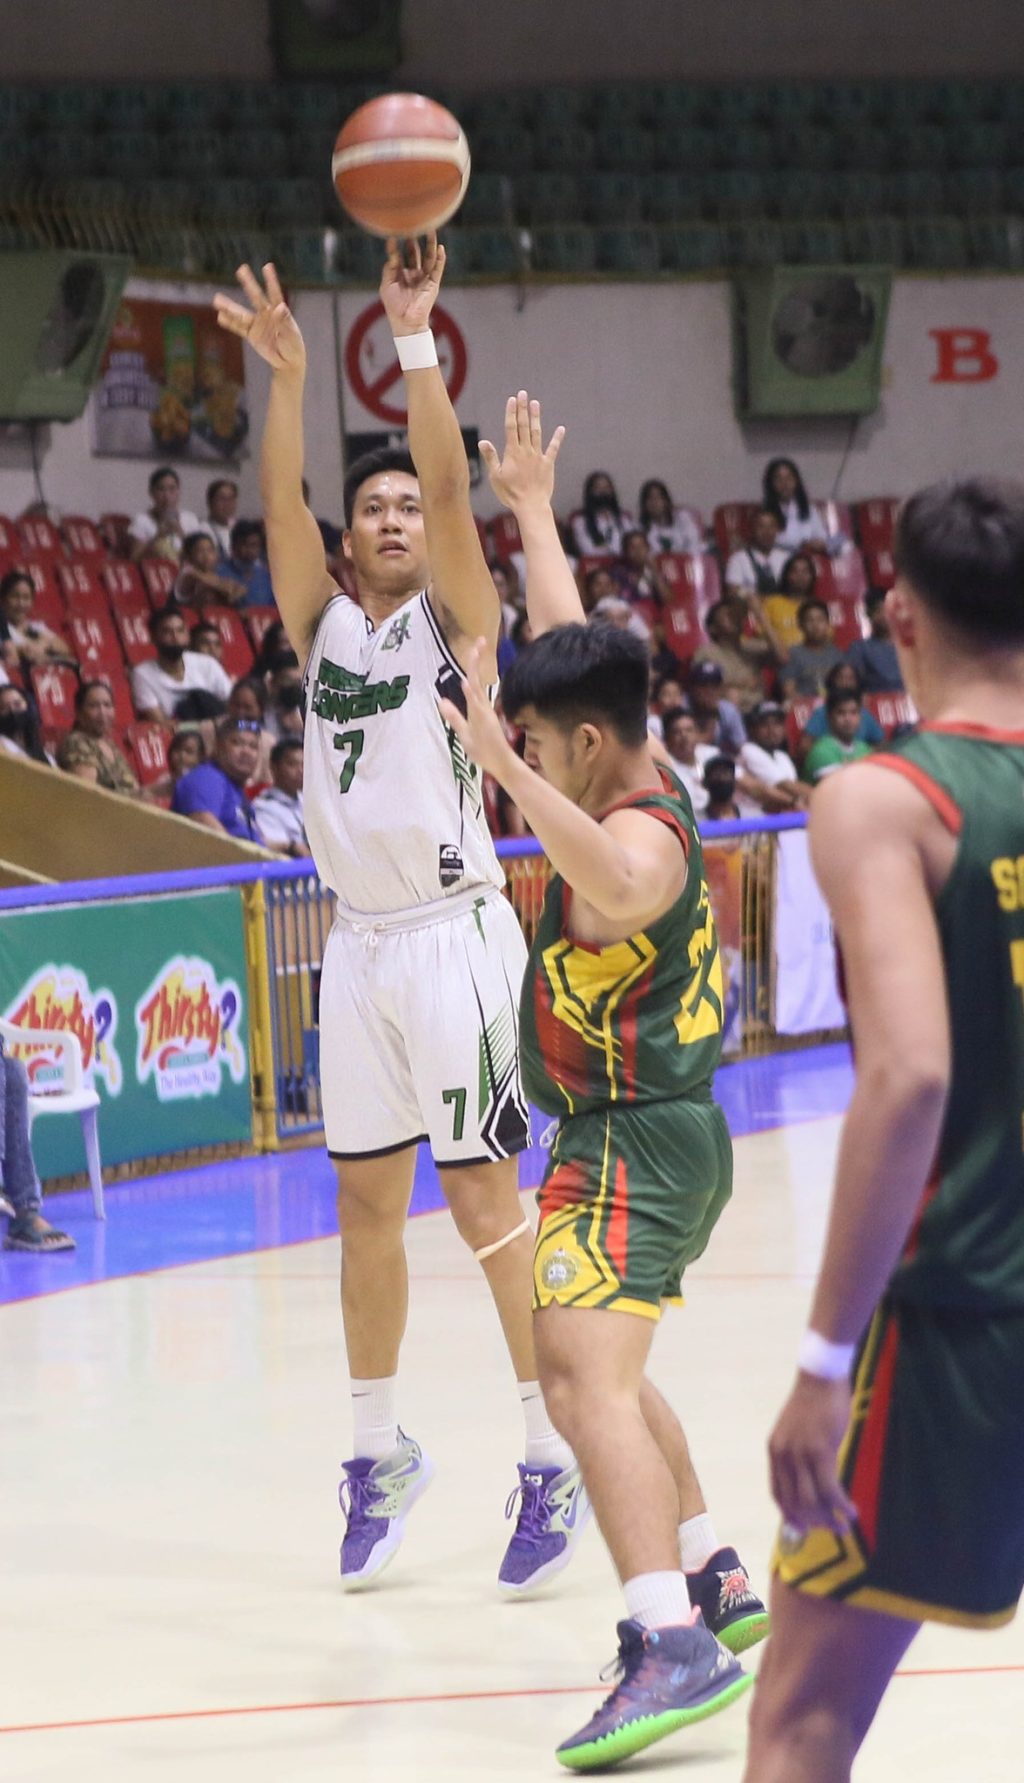 UV Green Lancers' team captain Ted Saga attempts a three-point shot during their game against USJ-R in the Cesafi men's basketball tournament. Saga leads the cast of the three-point shootout in the Cesafi All-Star Games tomorrow. | Photo from Sugbuanong Kodaker